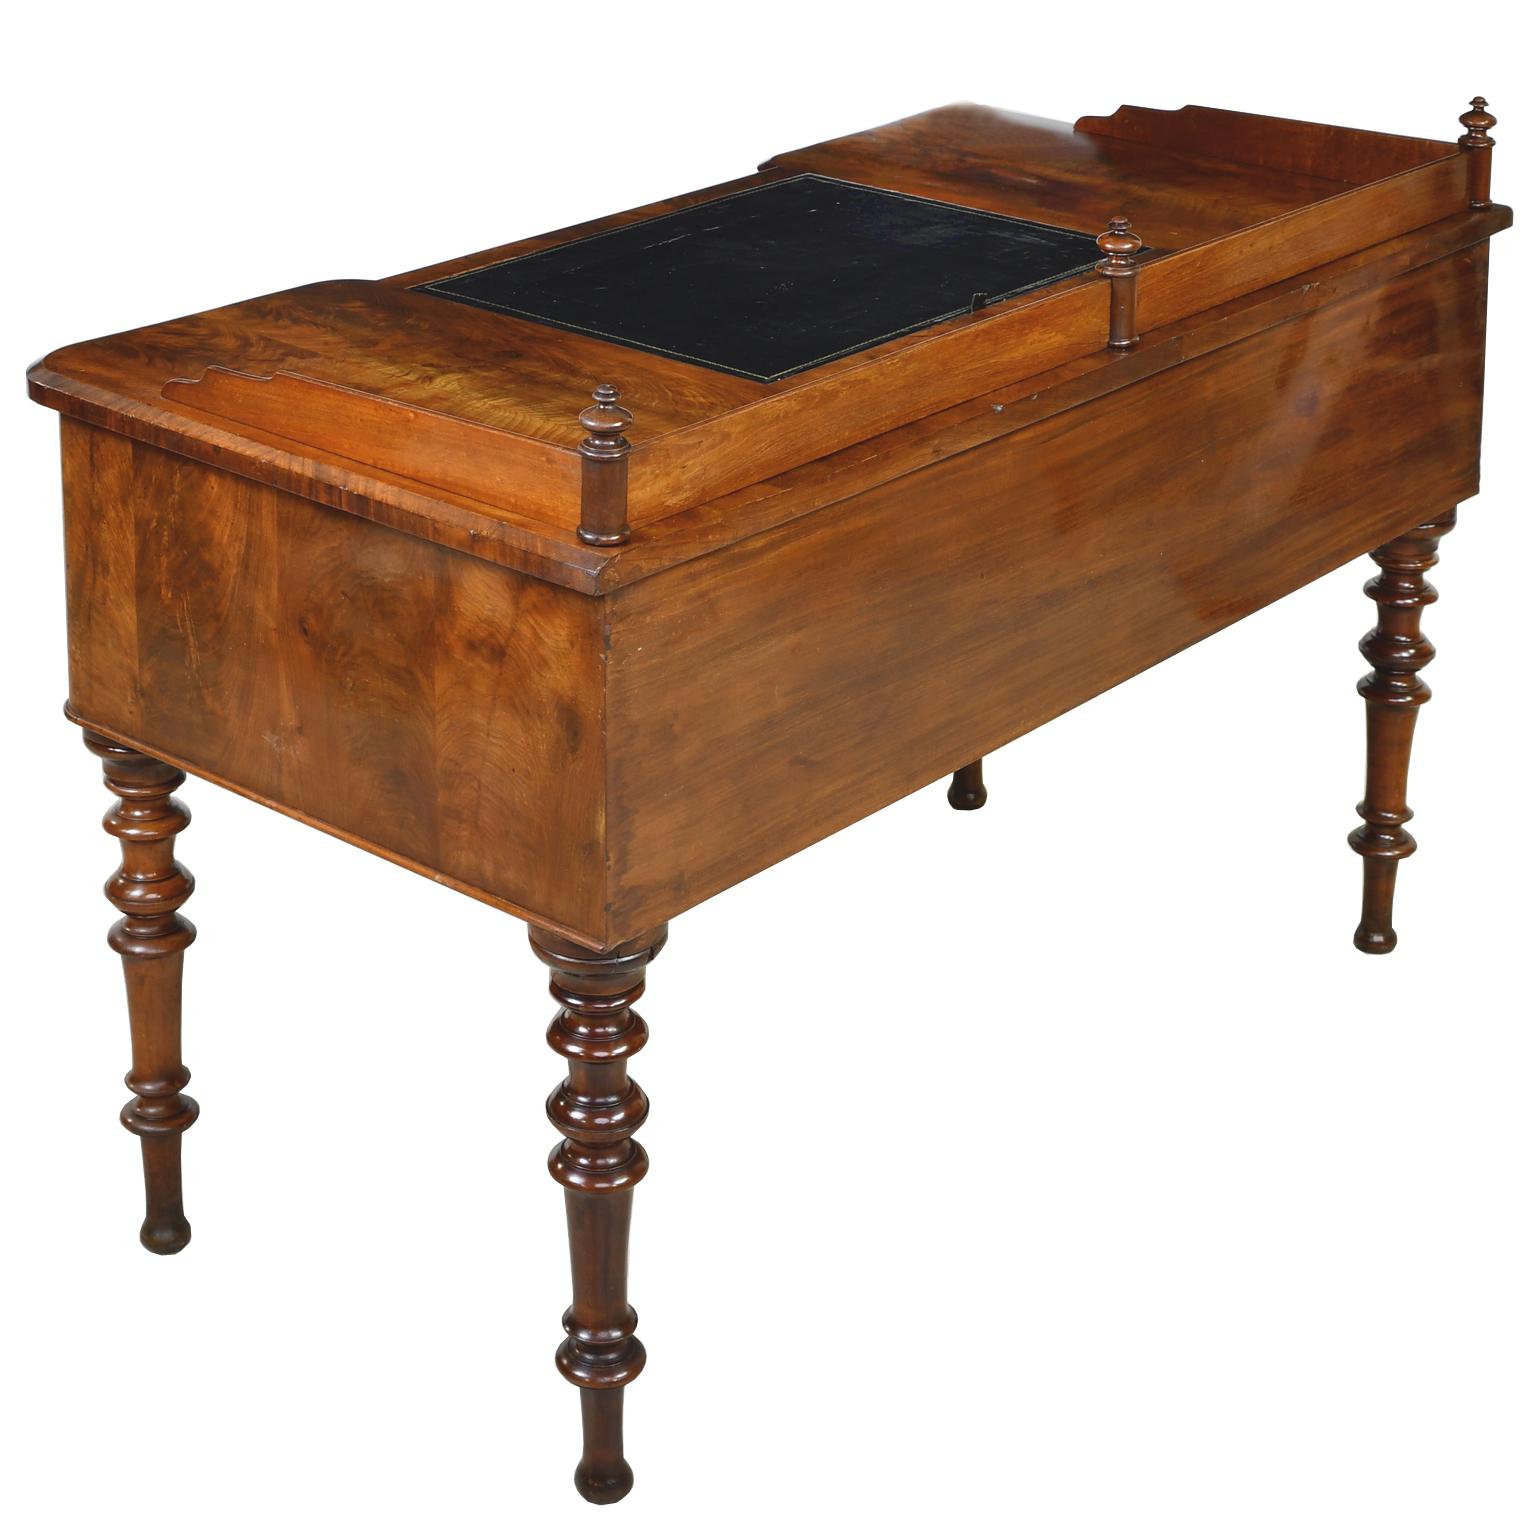 Hand-Crafted Karl Johan Writing Desk in West Indies Mahogany w/ Black Leather, Sweden, c 1830